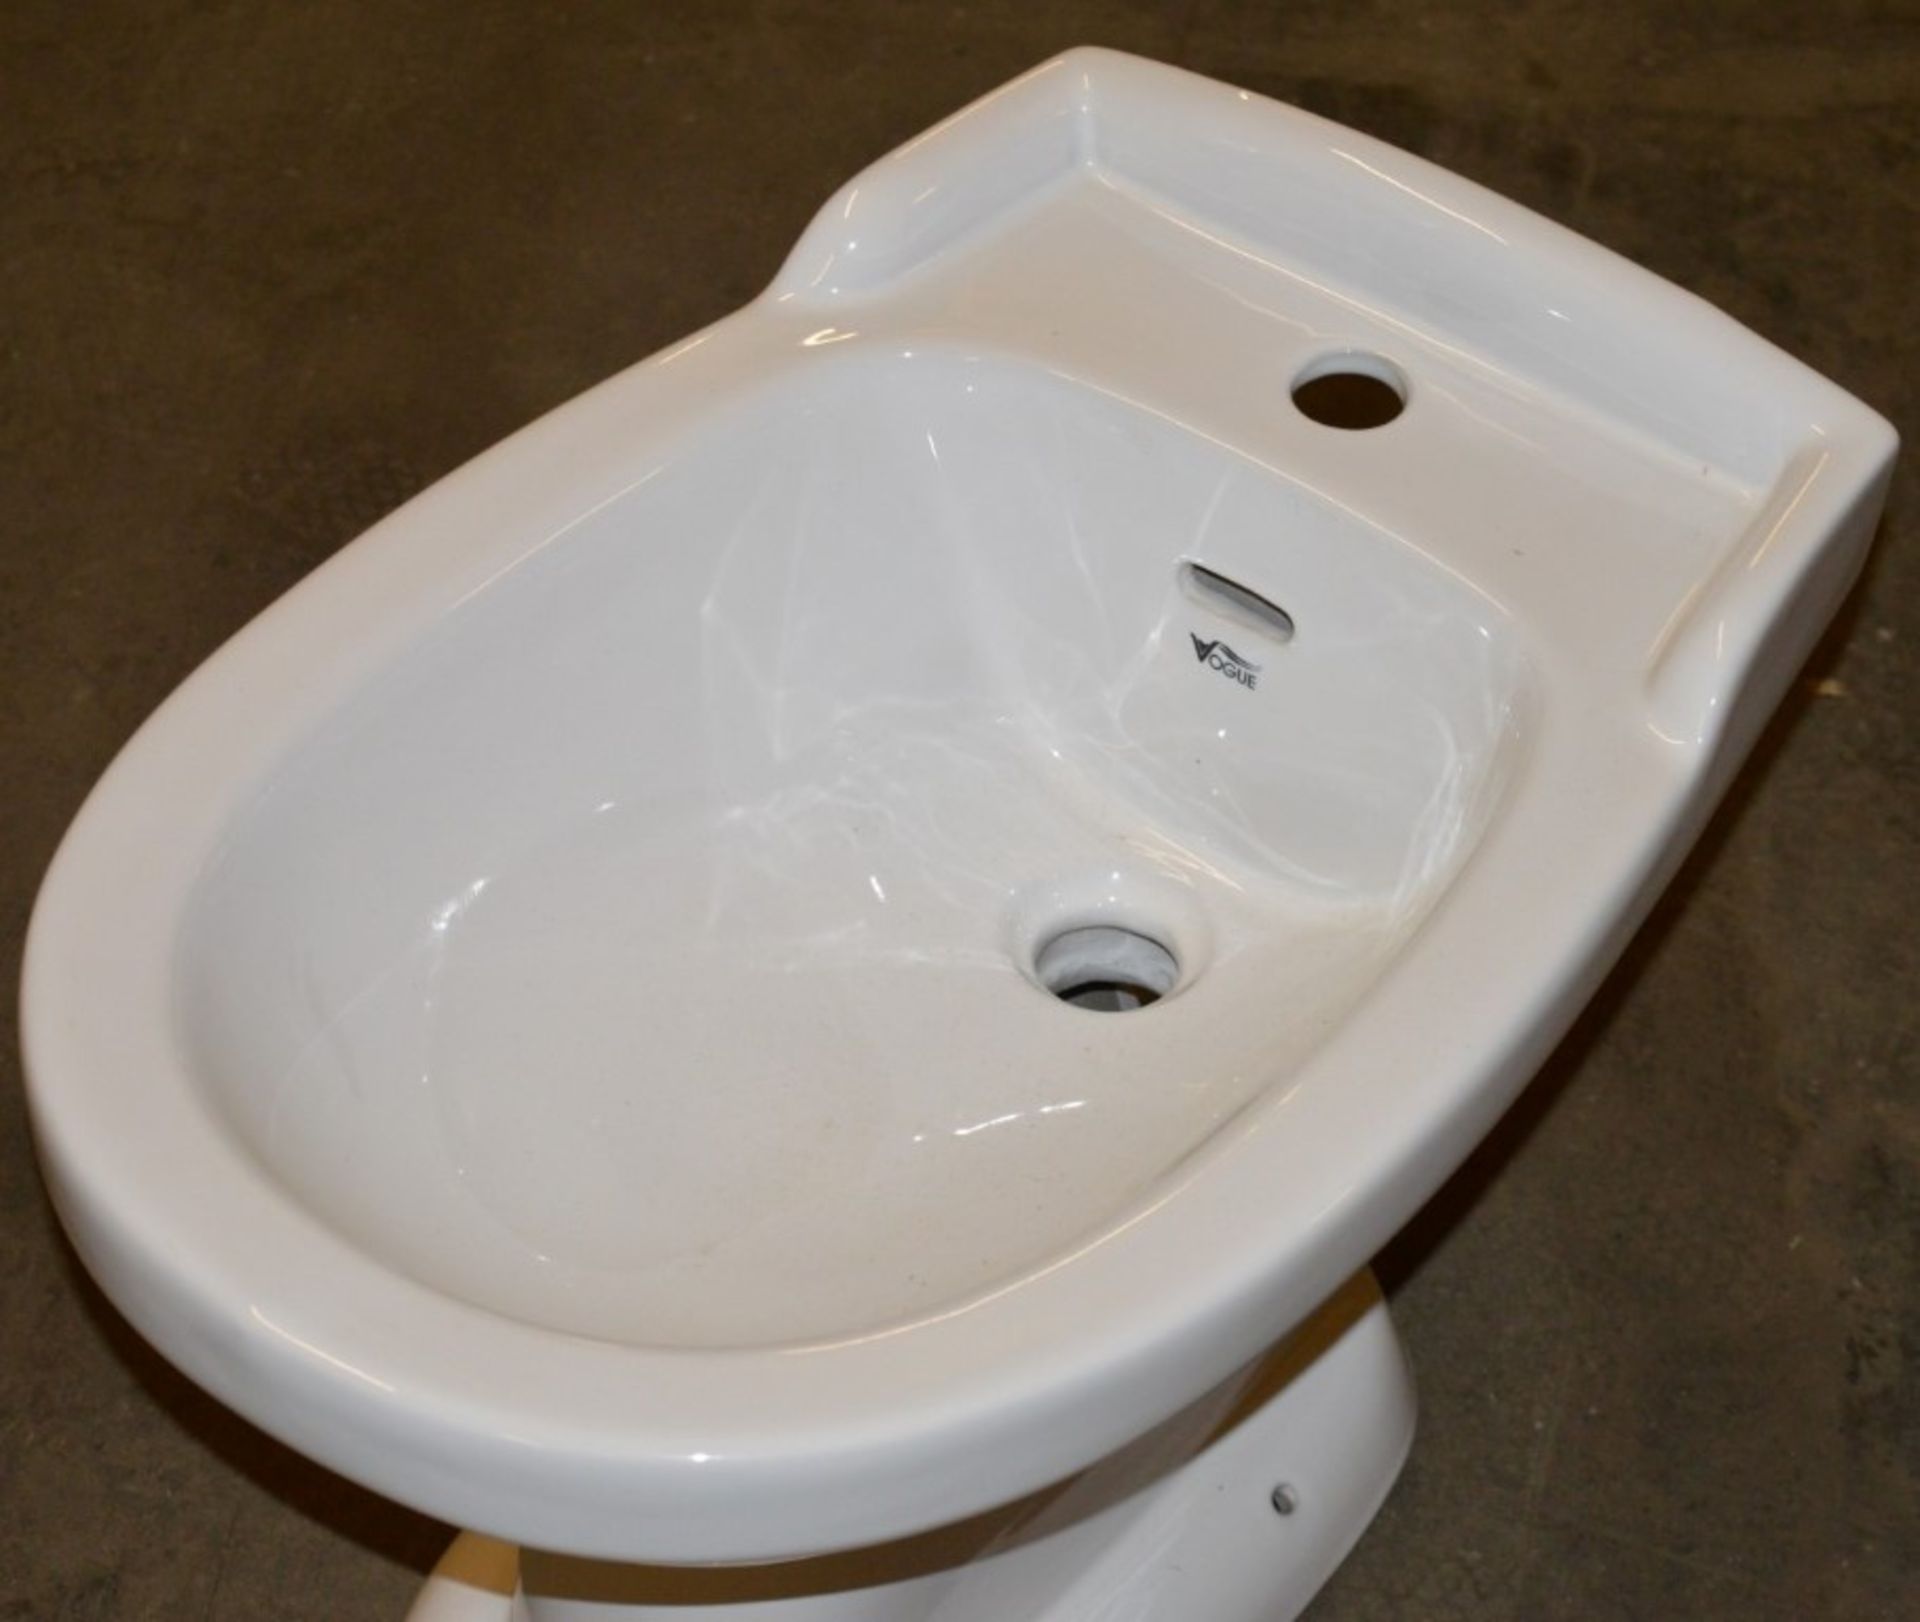 1 x Vogue Bathrooms HEYWOOD Single Tap Hole BIDET - Brand New and Boxed - High Quality White Ceramic - Image 3 of 3